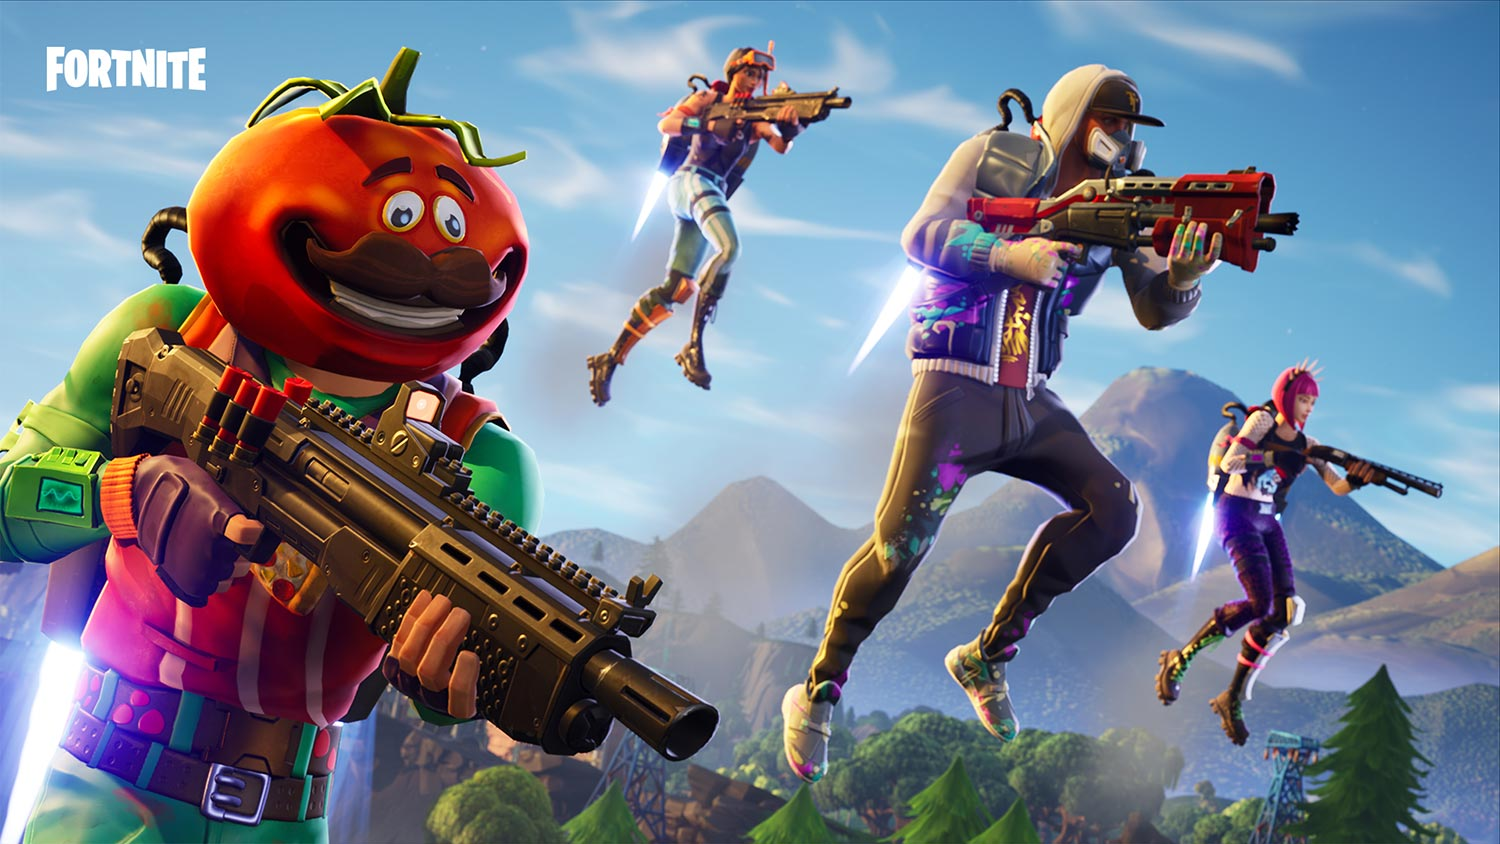 Fortnite on Android Might Require Manual APK Sideload